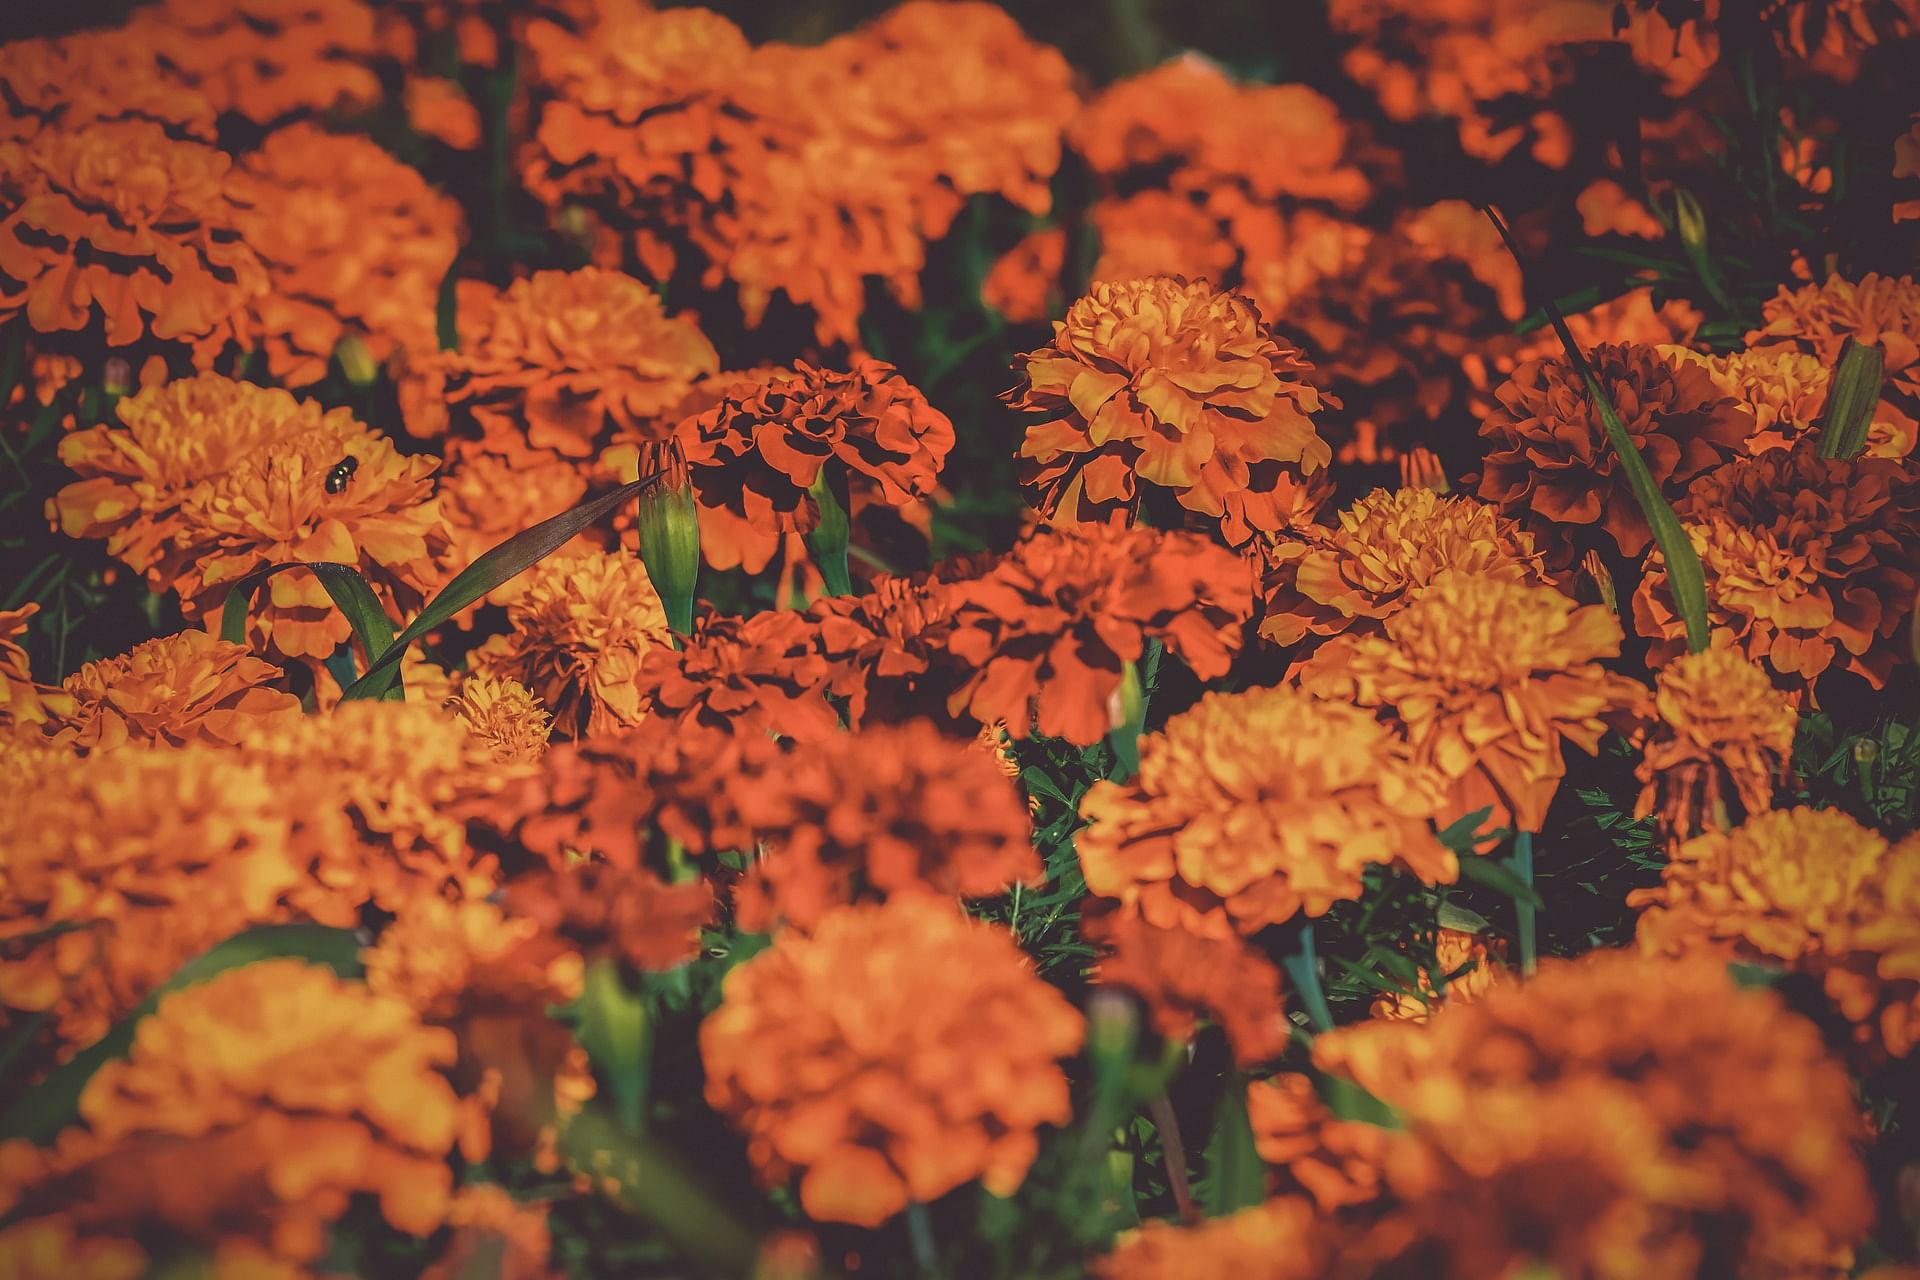 Over the past few years, KIA has witnessed a huge growth in flower exports due to the availability of a CoolPort, equipped with temperature monitoring and cold rooms, with varying temperatures to handle commodities with different requirements. Representative image/Pixabay